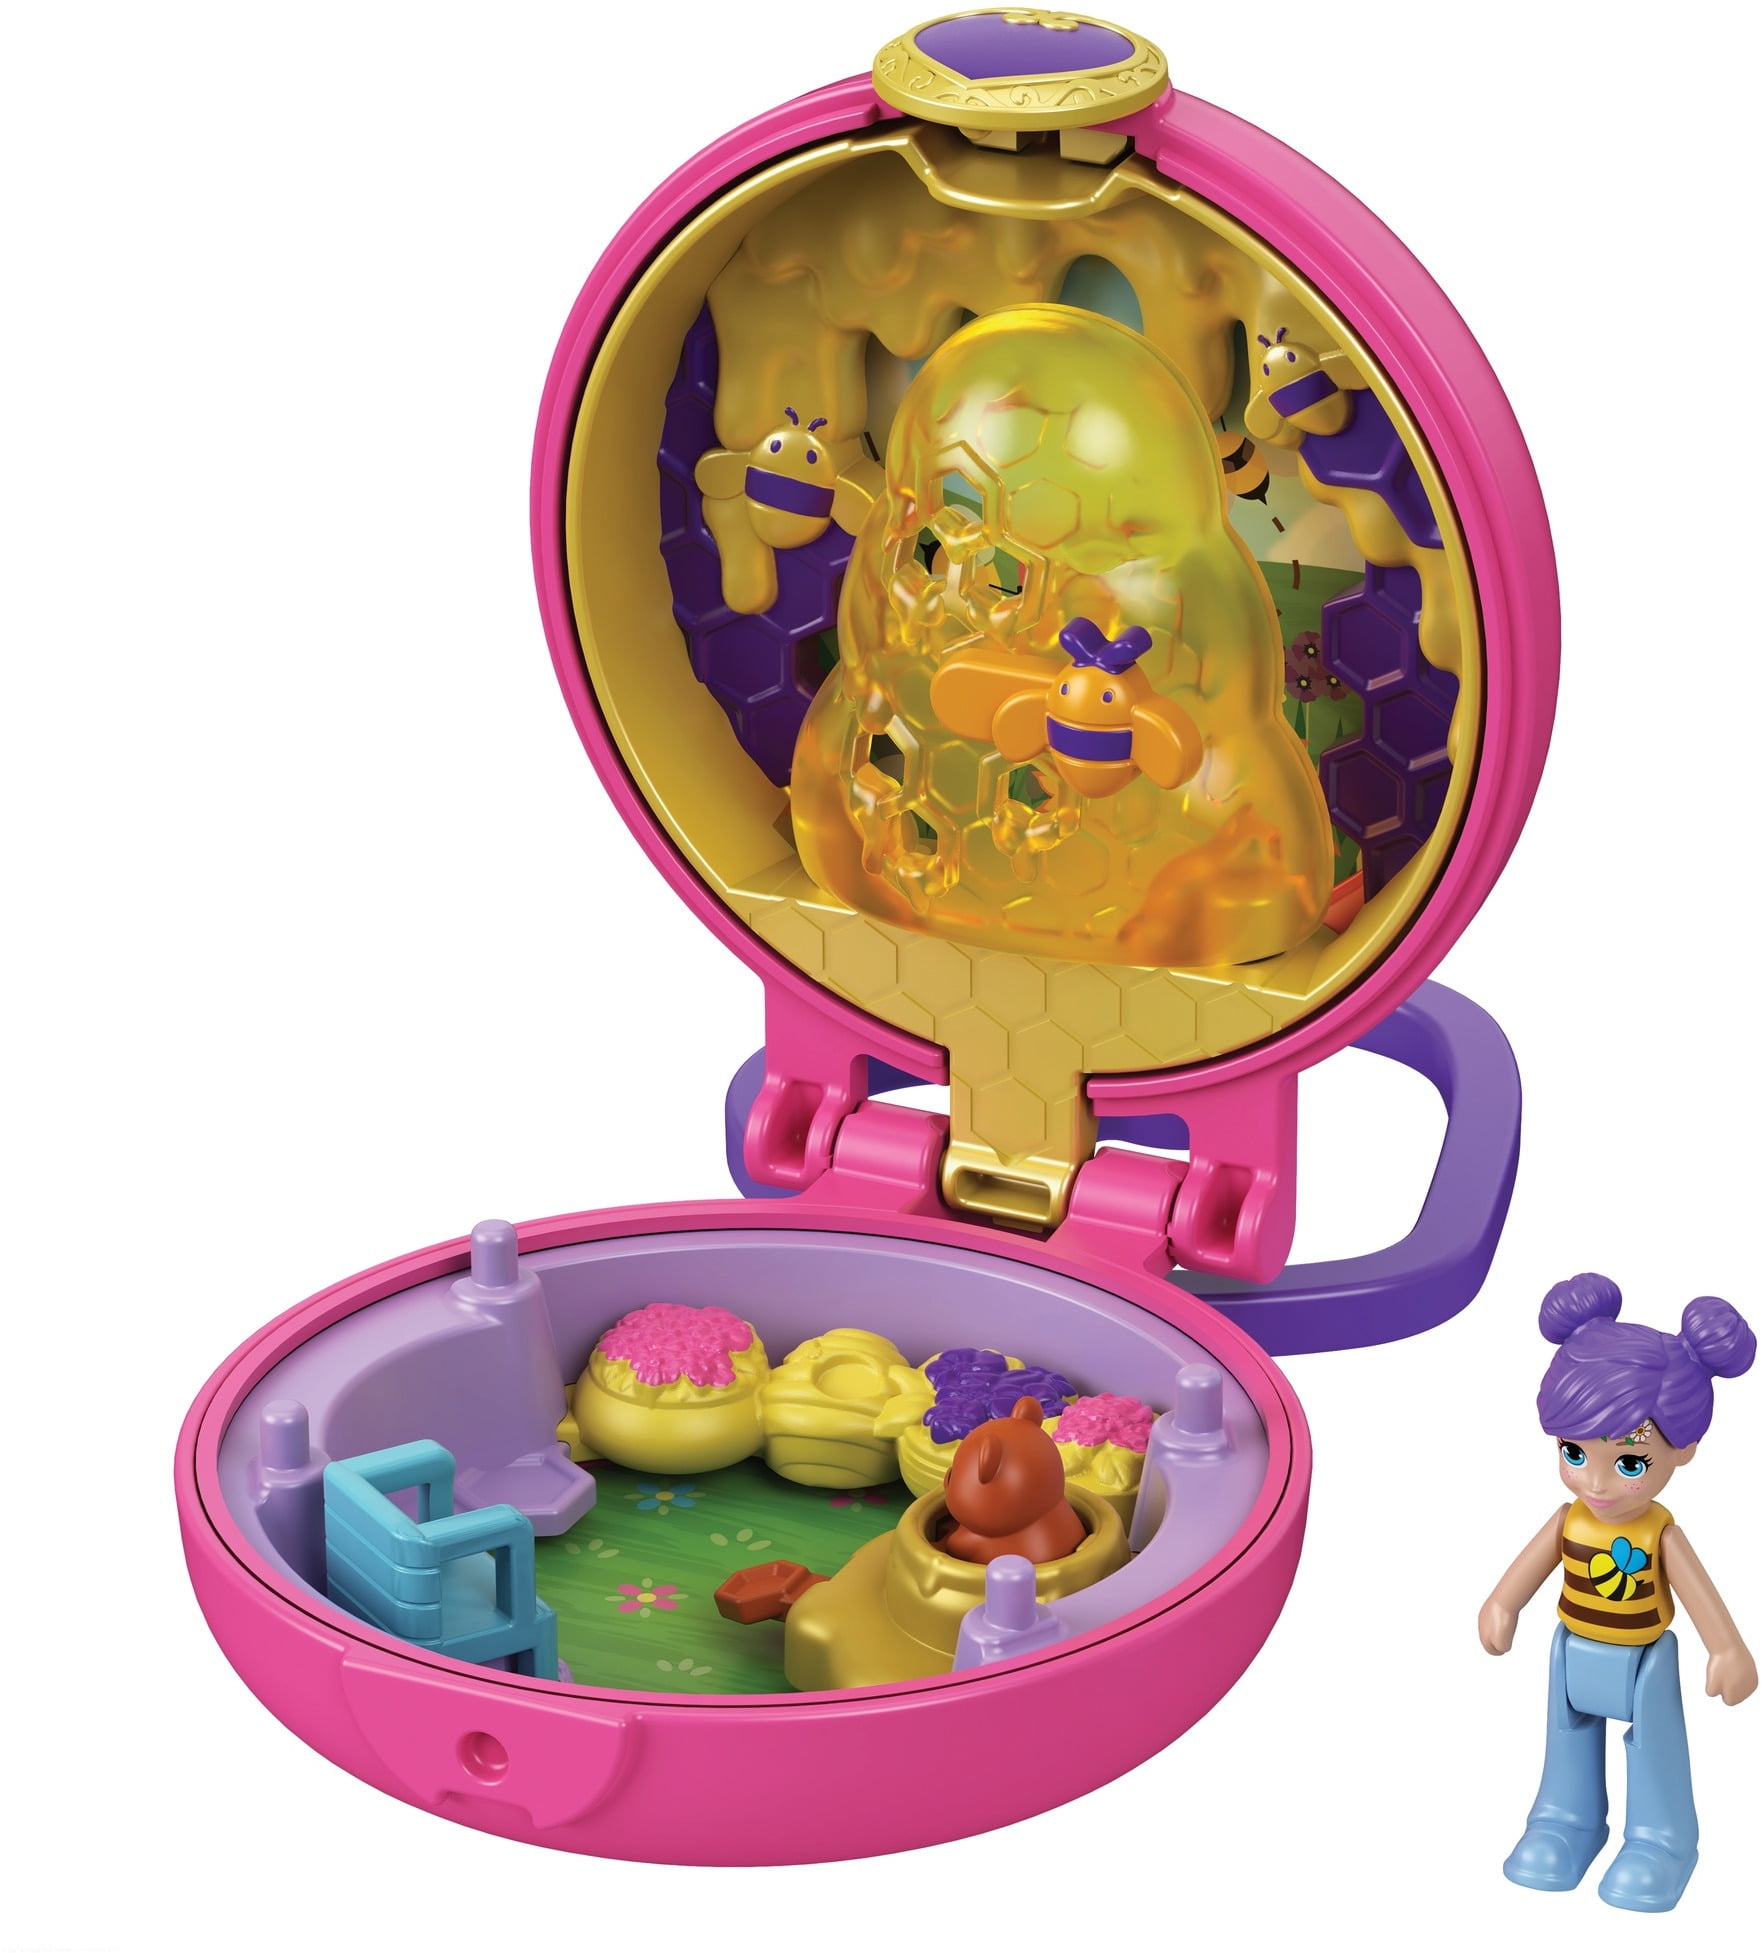 Polly Pocket Compact Heart Shape Living Room Set Pizza Bear Couch Table